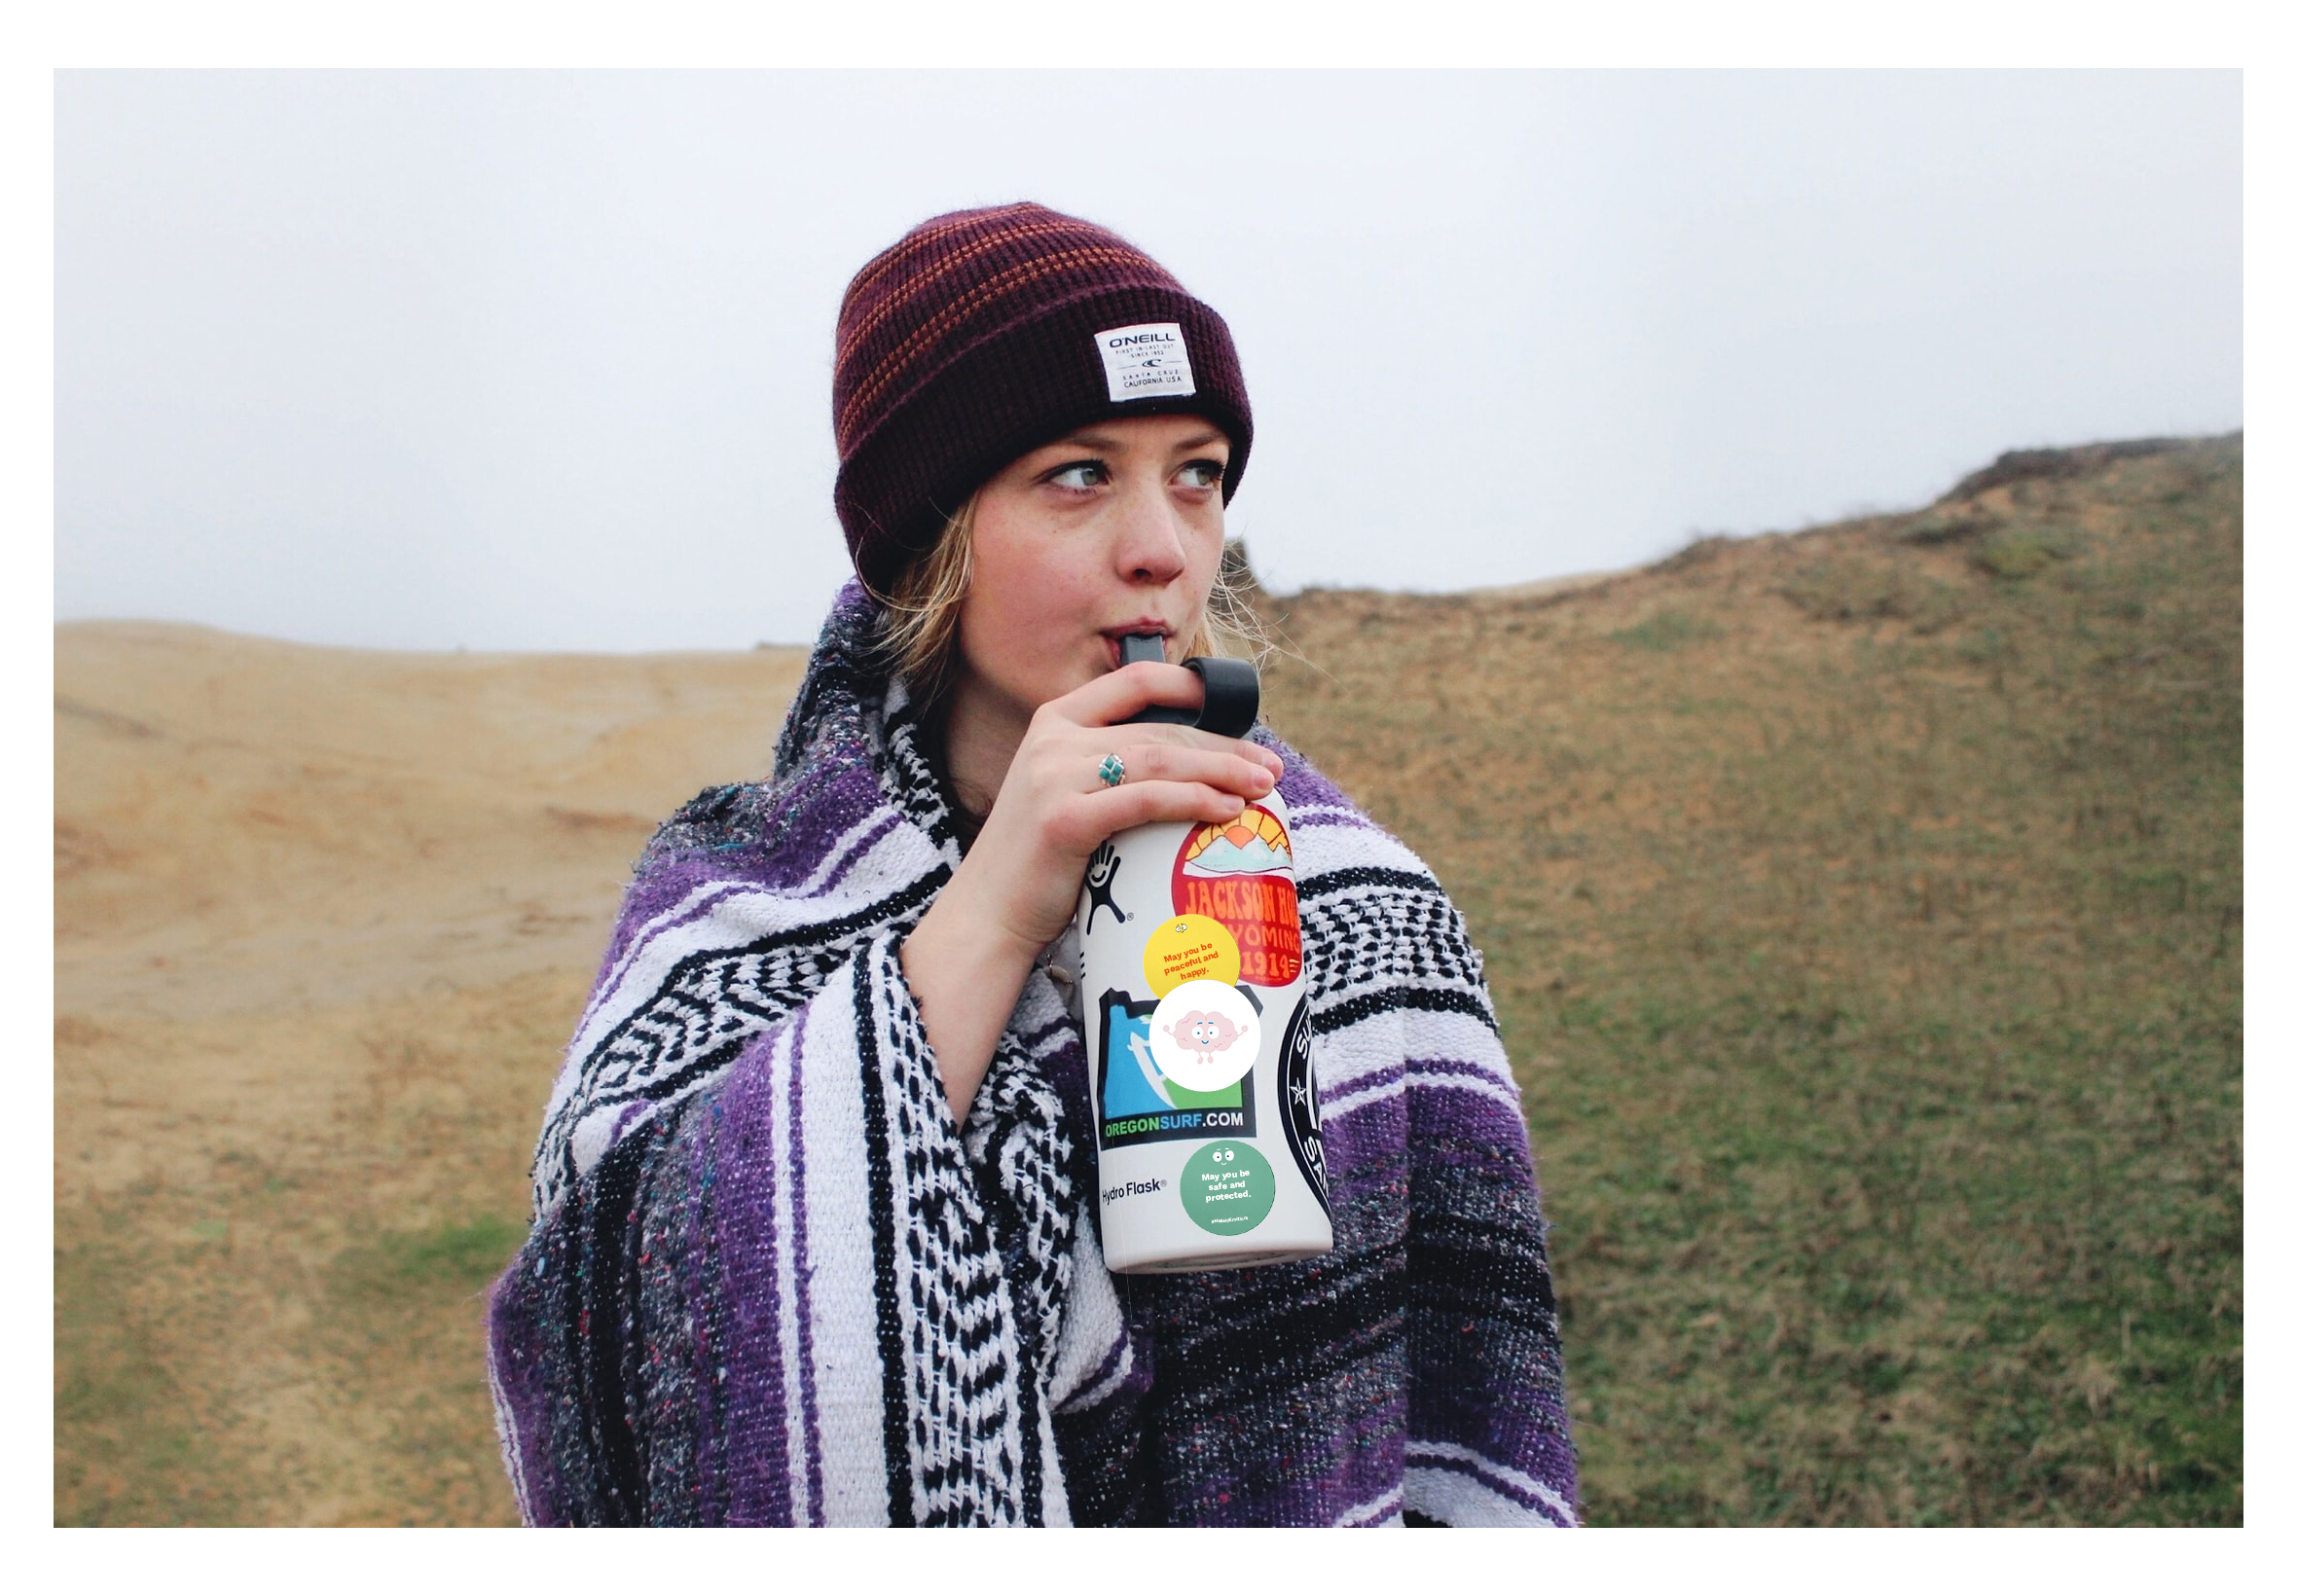 Photo of a teen sipping from a water bottle decorated with stickers designed for the Me and My Emotions campaign designed by ArtCenter students for a Designmatters class and implemented by a nonprofit partner to help teens with mental wellbeing.